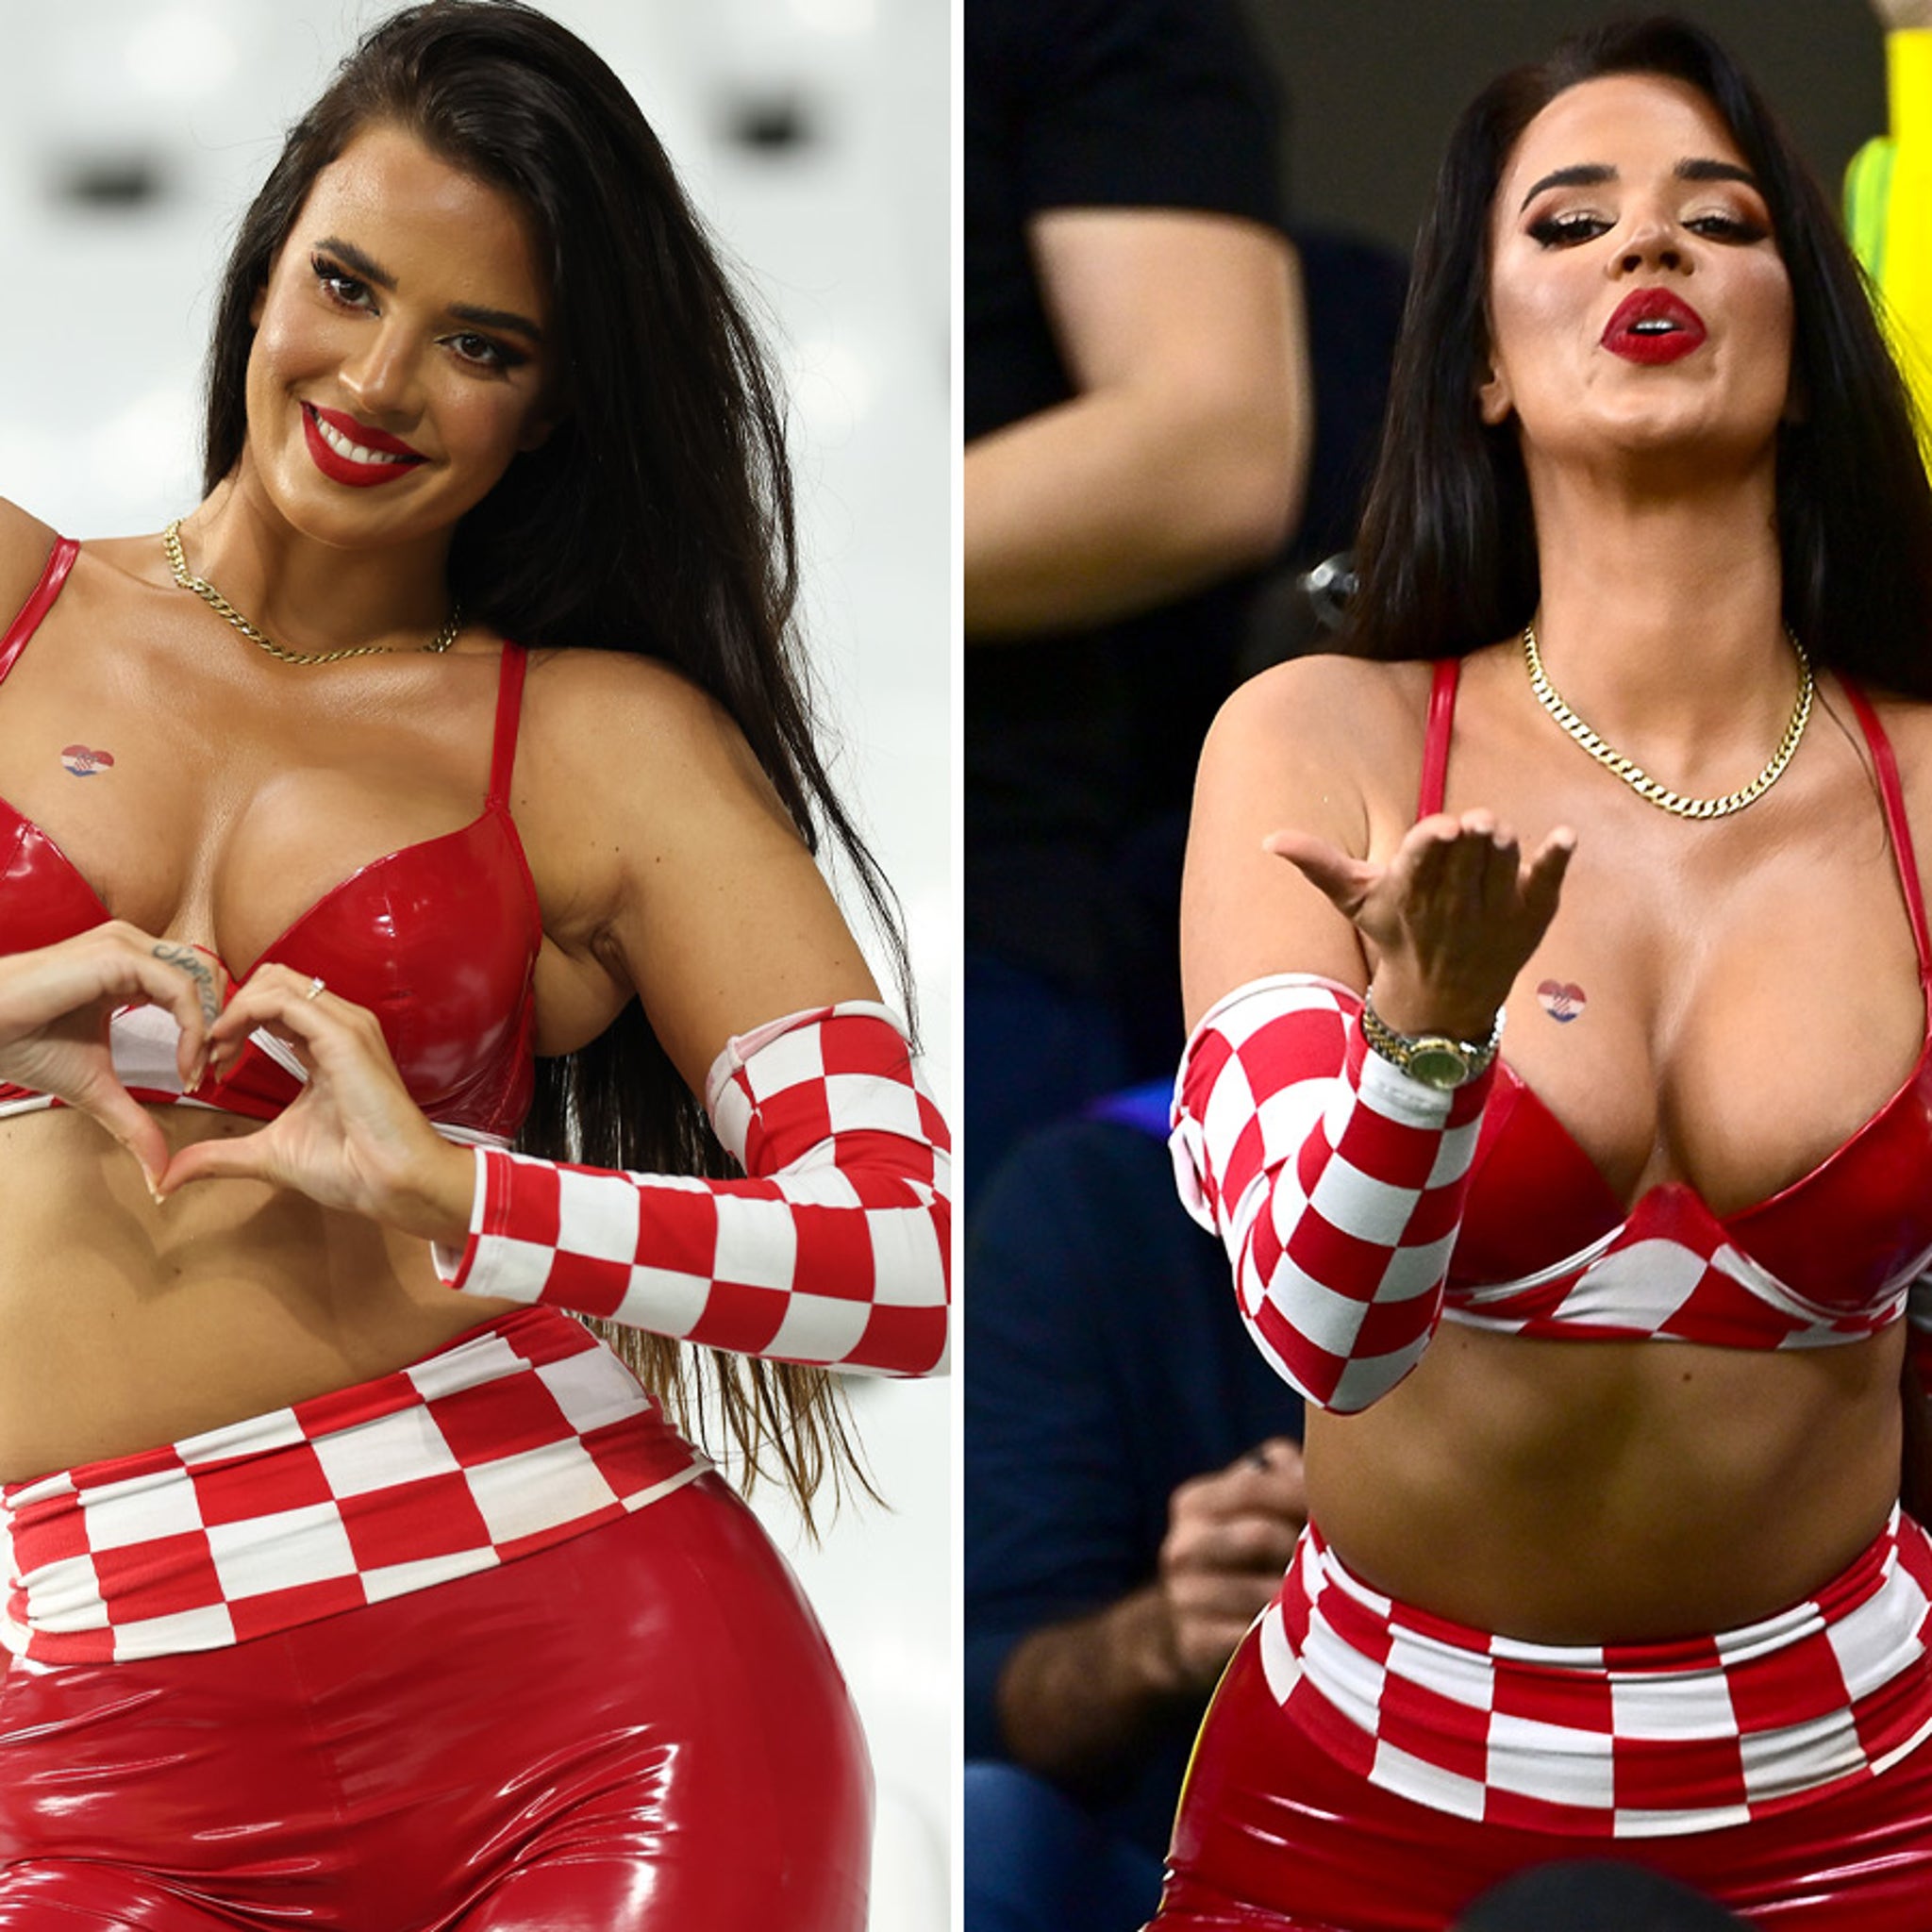 Xnxxxsexyvideo - Model Ivana Knoll Celebrates Croatia's Huge World Cup Win In Sexy Outfit